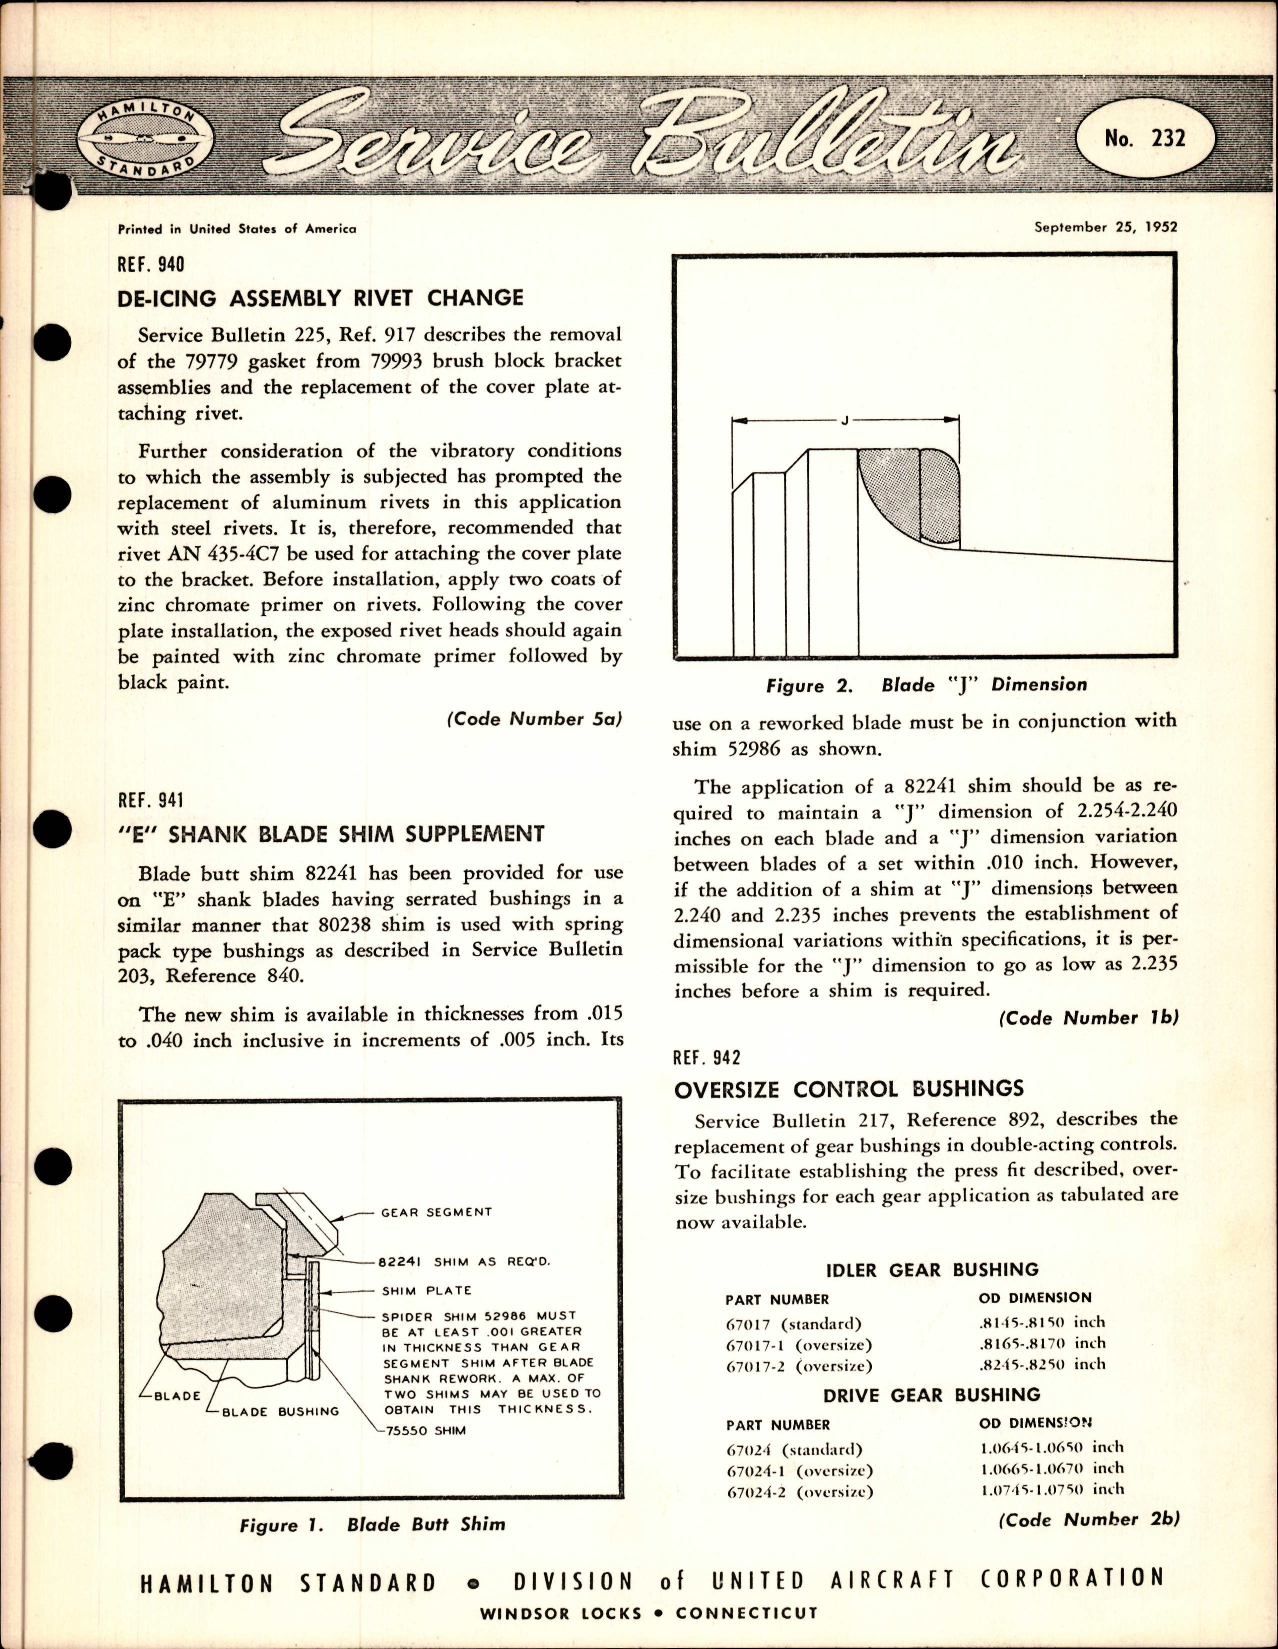 Sample page 1 from AirCorps Library document: De-Icing Assembly Rivet Change, Ref 940